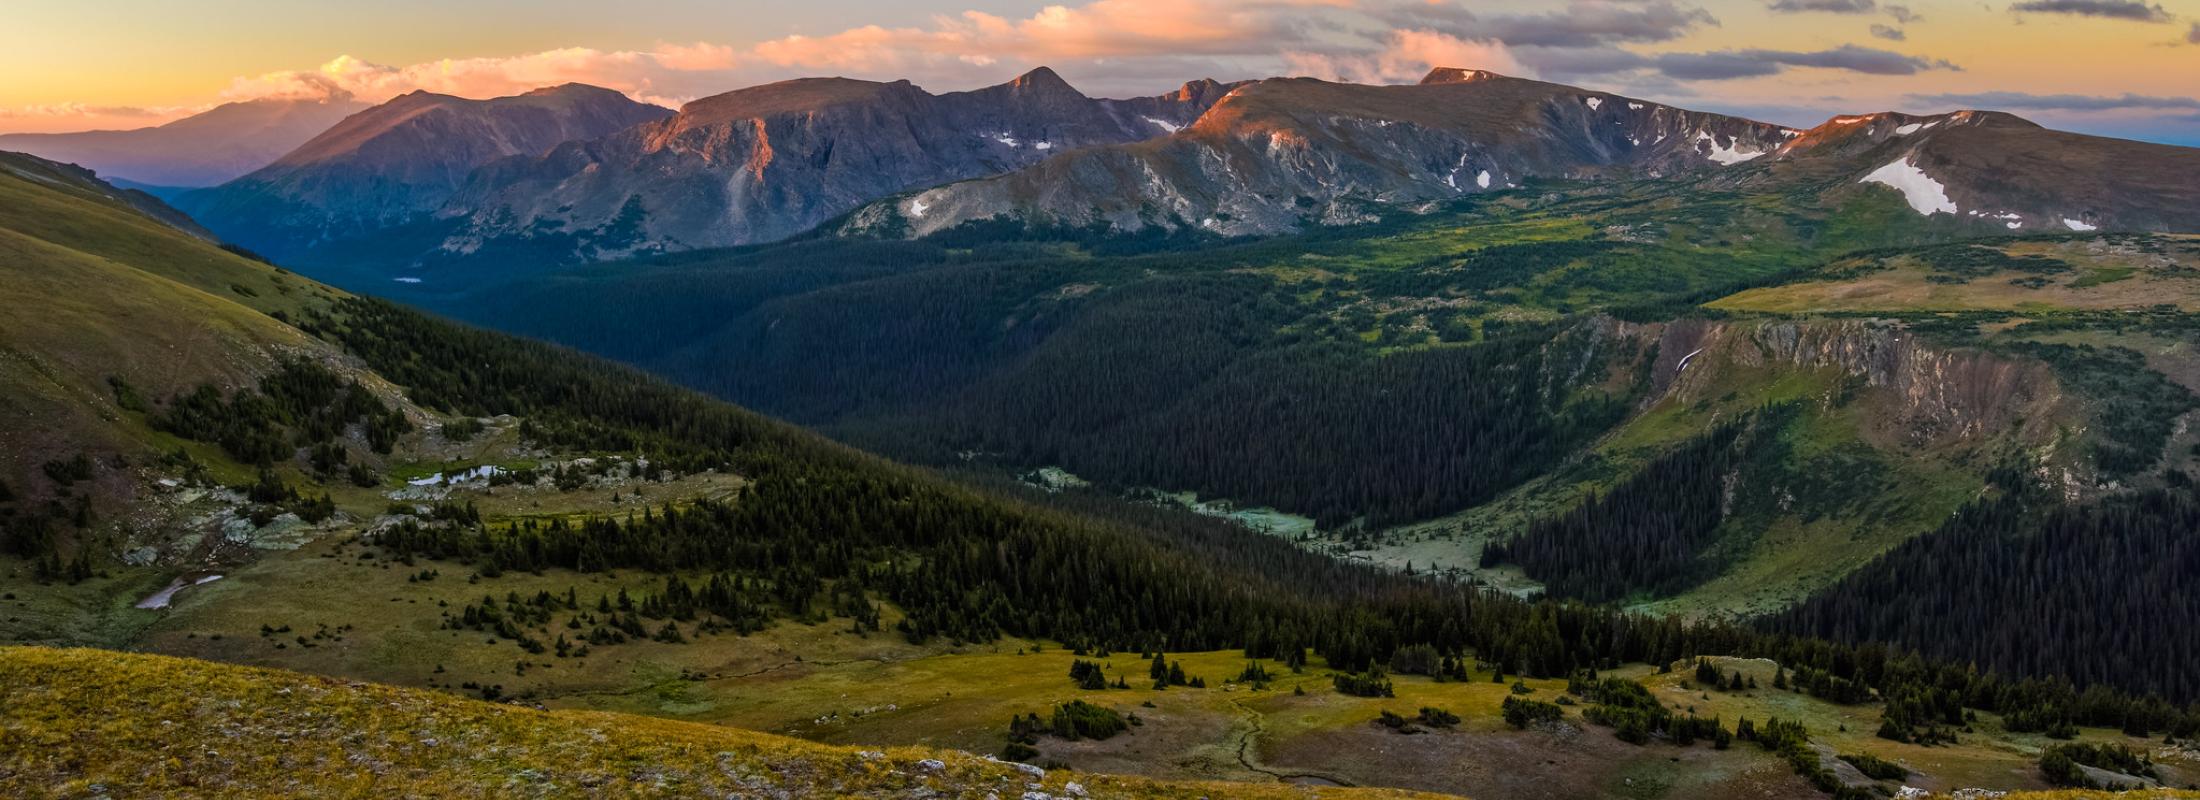 Photo of Rocky Mountain National Park by AER Wilmington DE, Creative Commons license